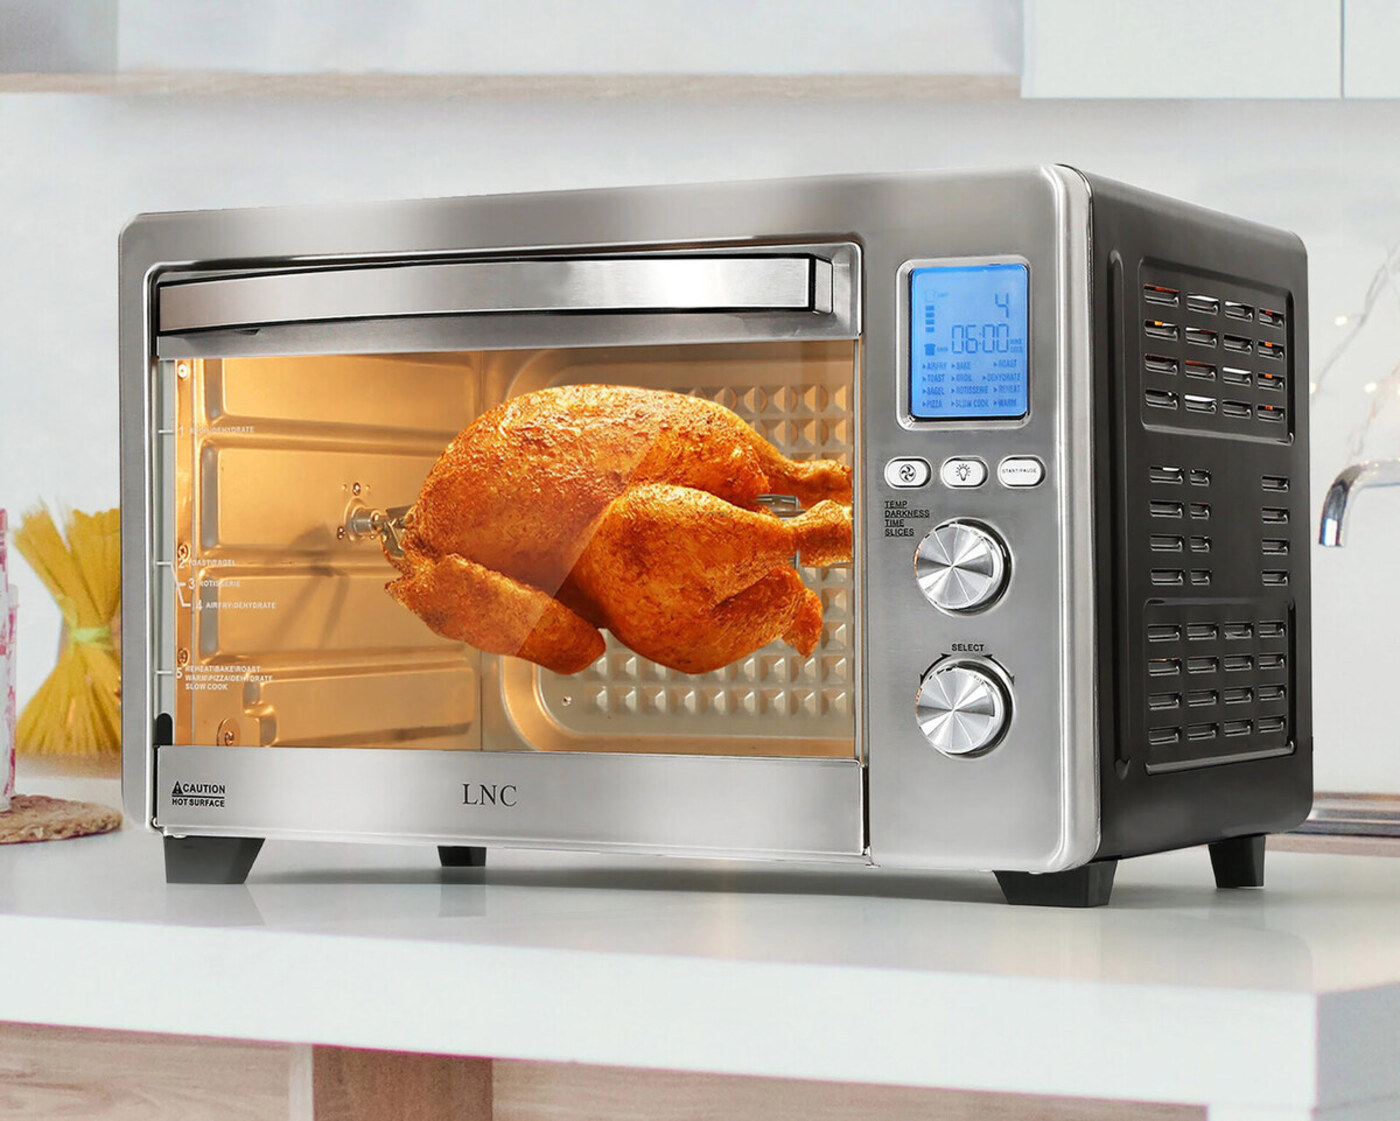 Hamilton Beach 31190C Digital Display Countertop Convection Toaster Oven  with Rotisserie, Large 6-Slice, Stainless Steel